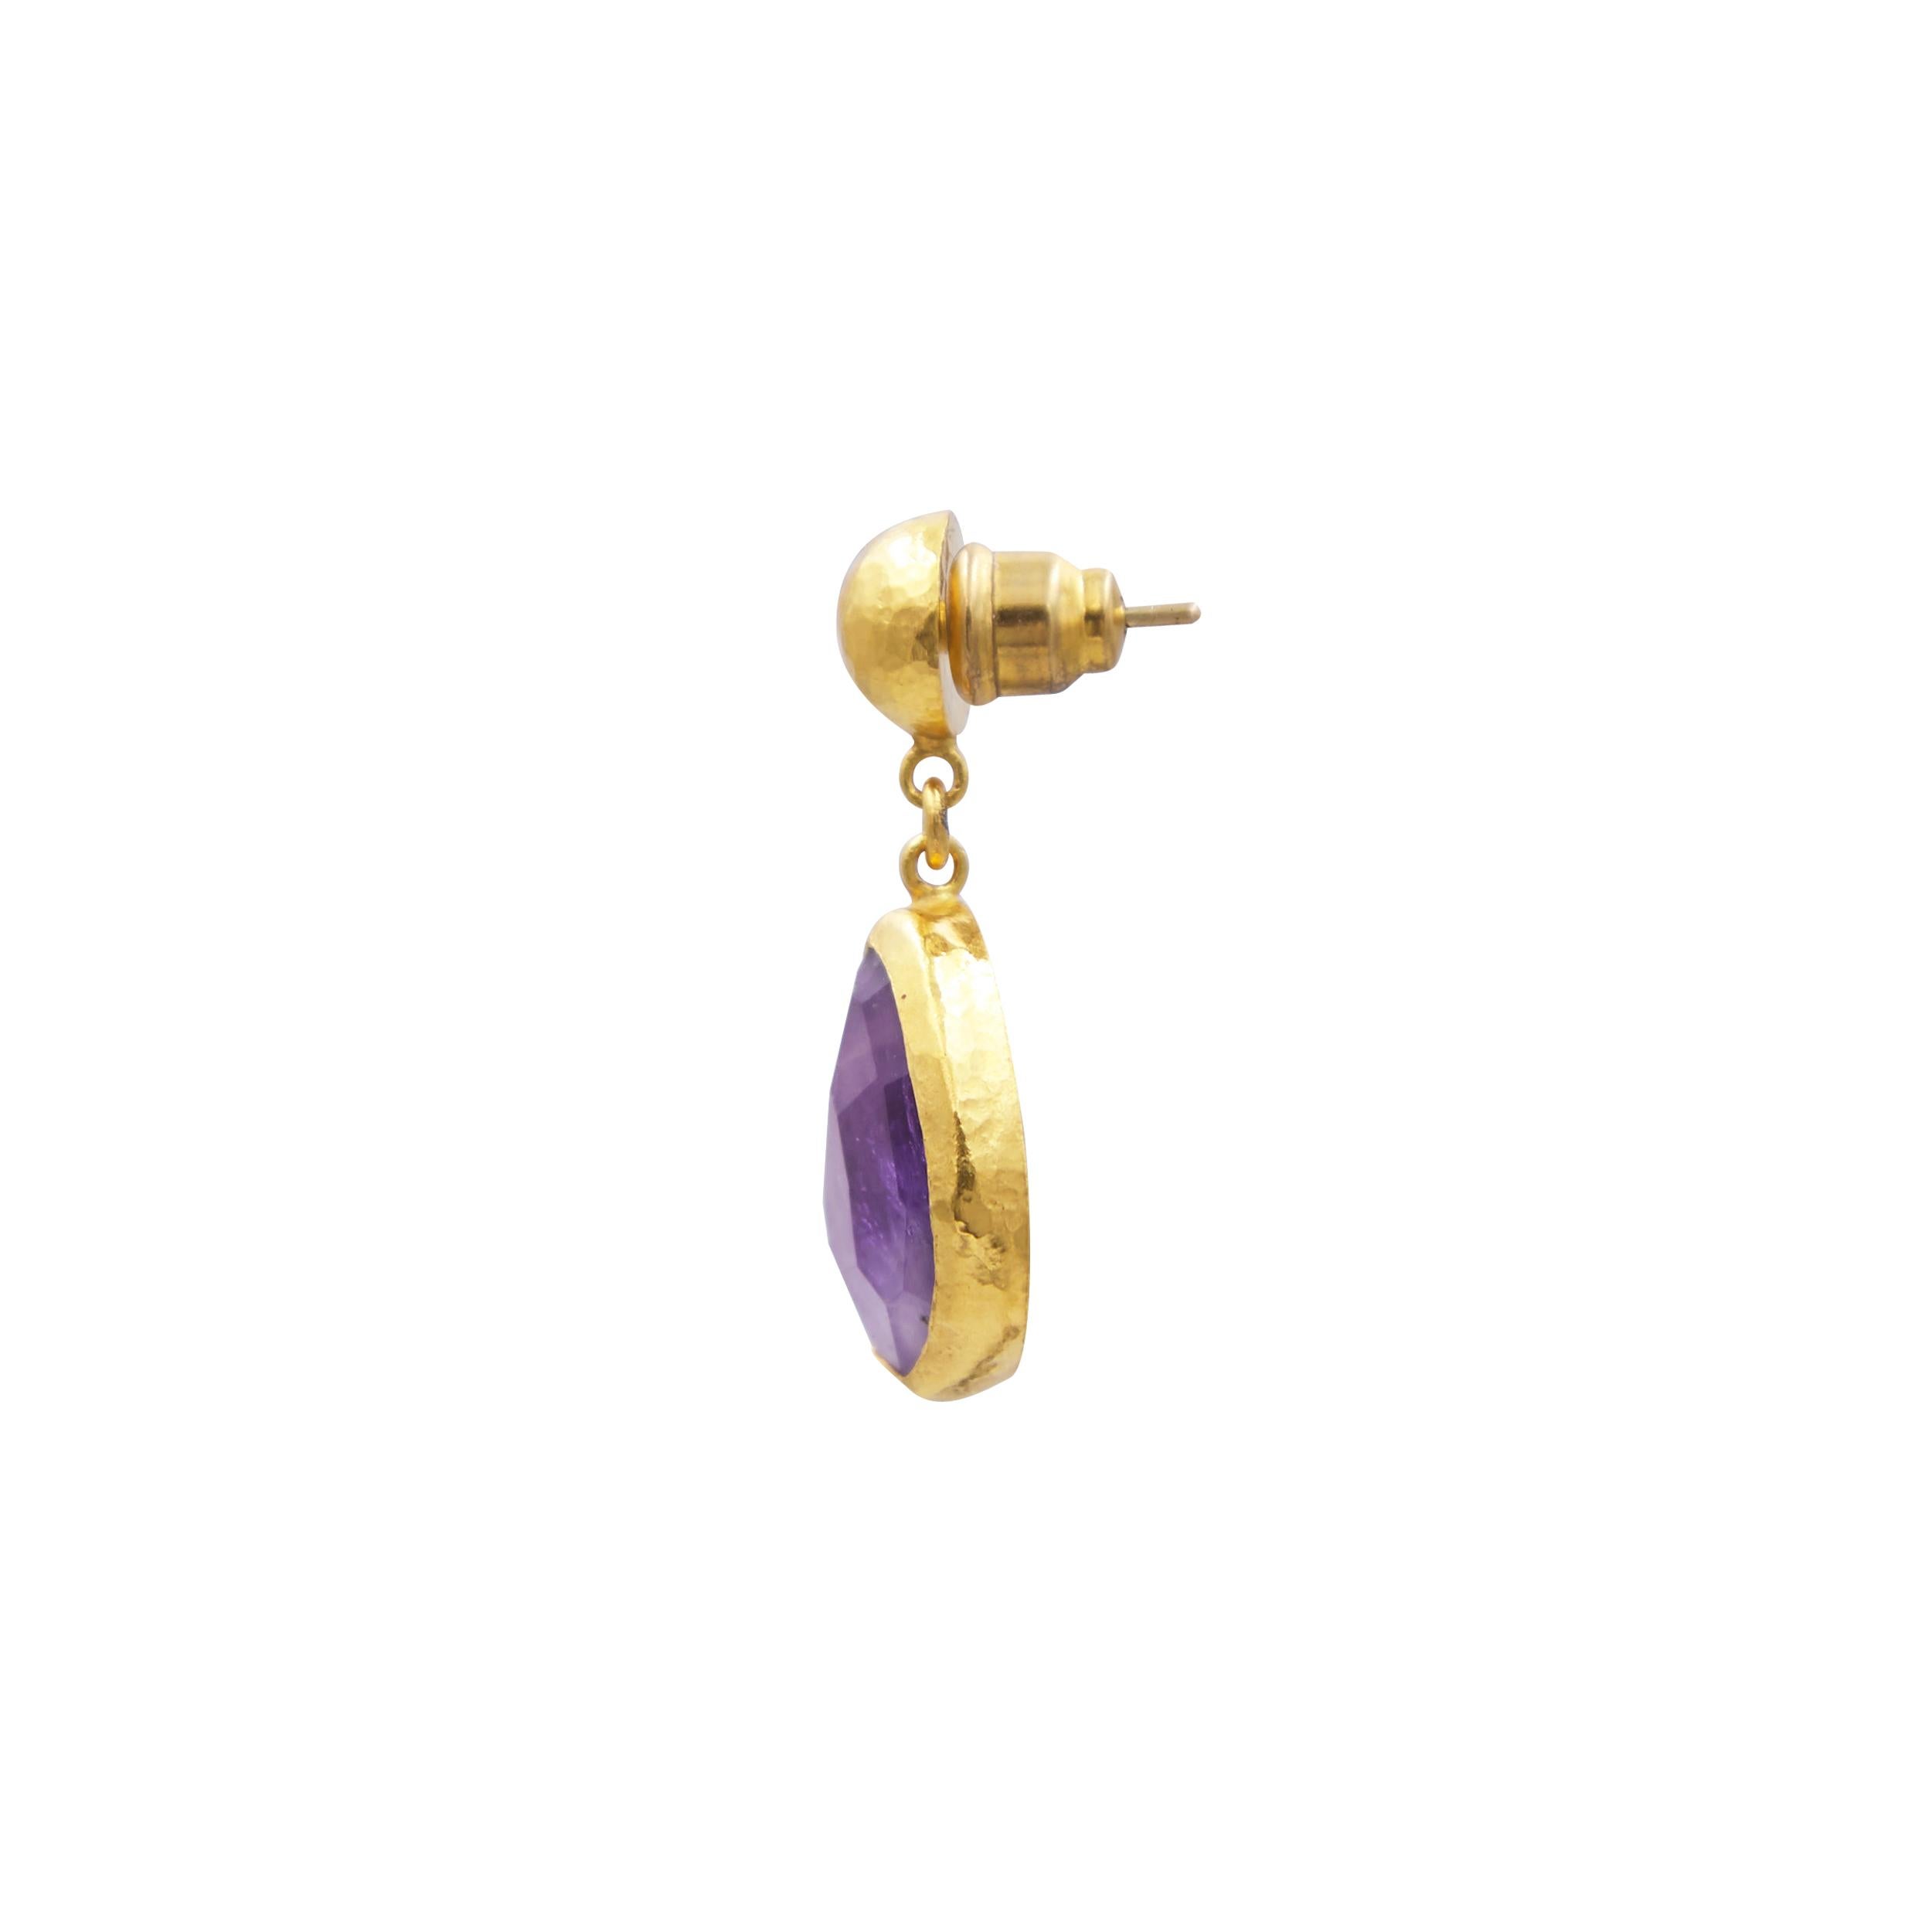 GURHAN one-of-a-kind drop earrings in 24 Karat yellow gold featuring a 17x13mm amorphous faceted Amethyst, 13.76 cts. 1.21